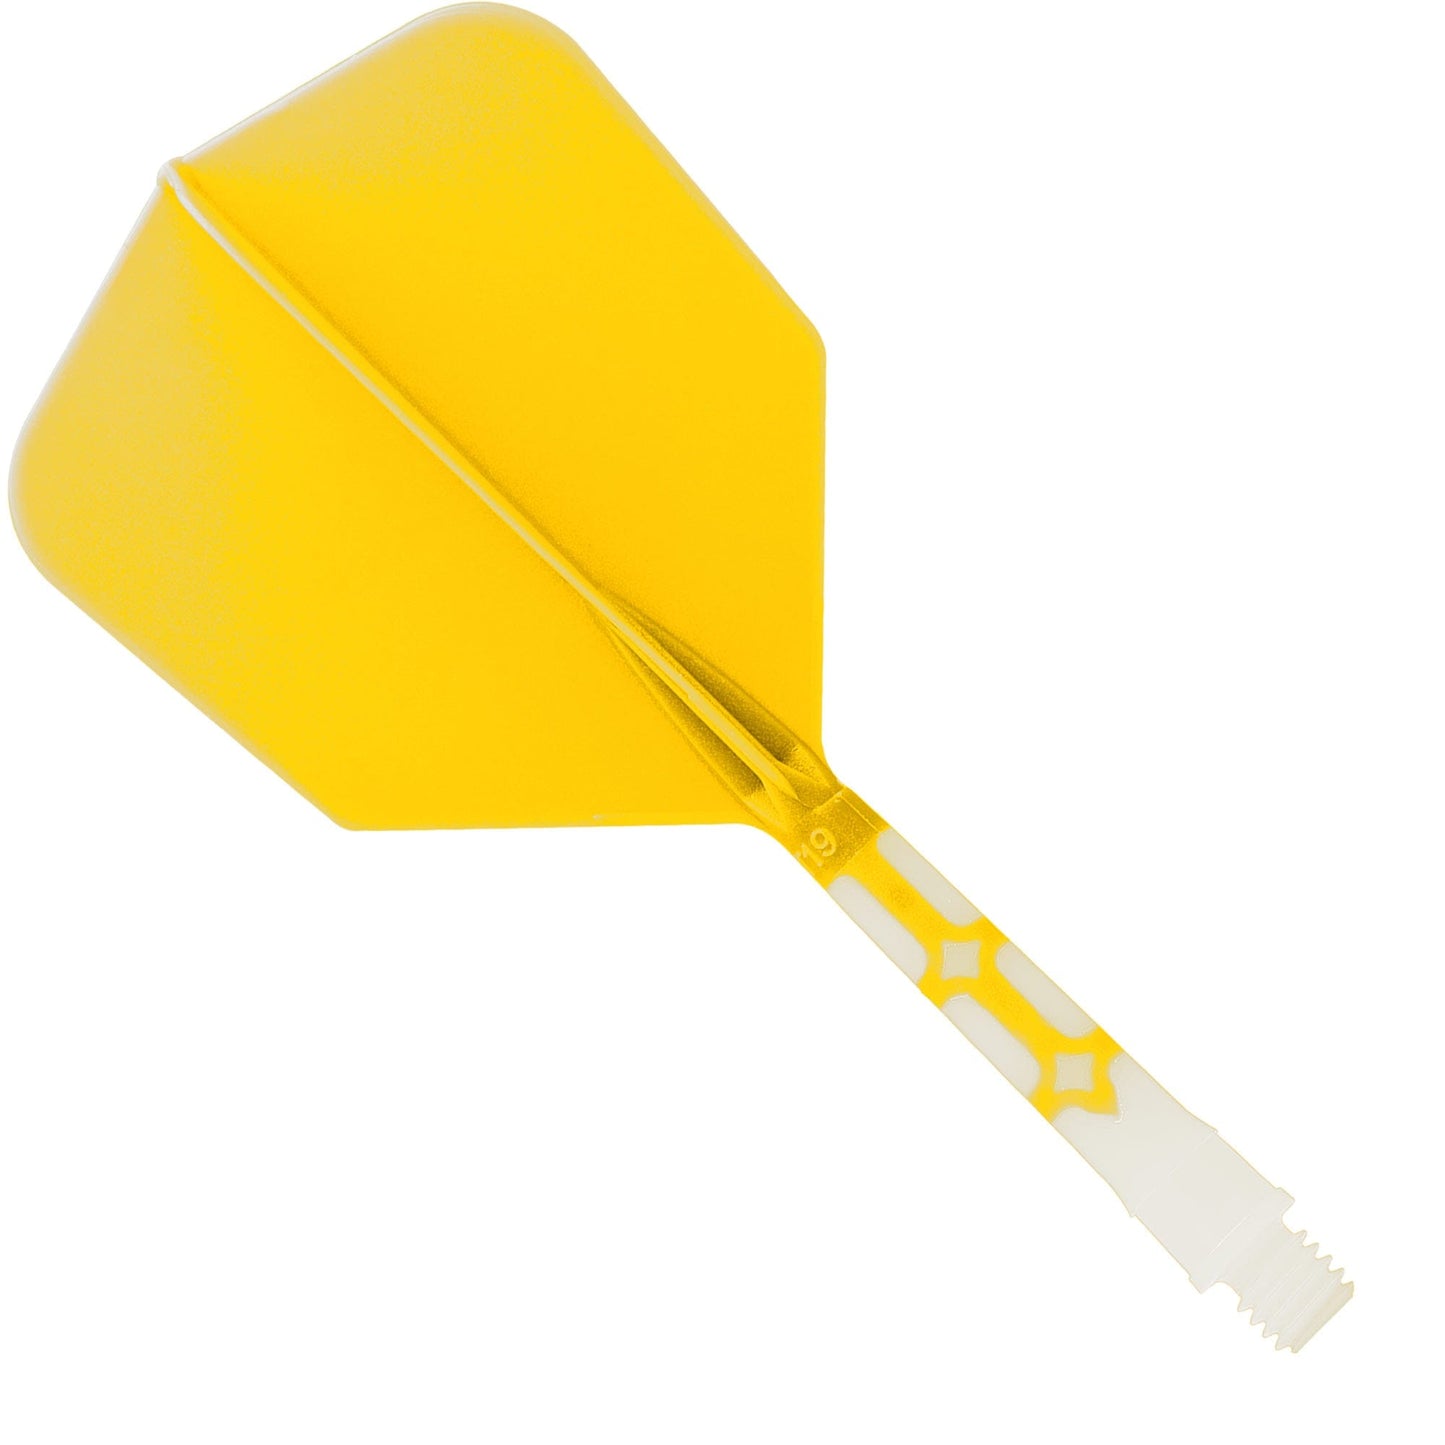 Cuesoul Rost T19 Integrated Dart Shaft and Flights - Big Wing - White with Yellow Flight Medium